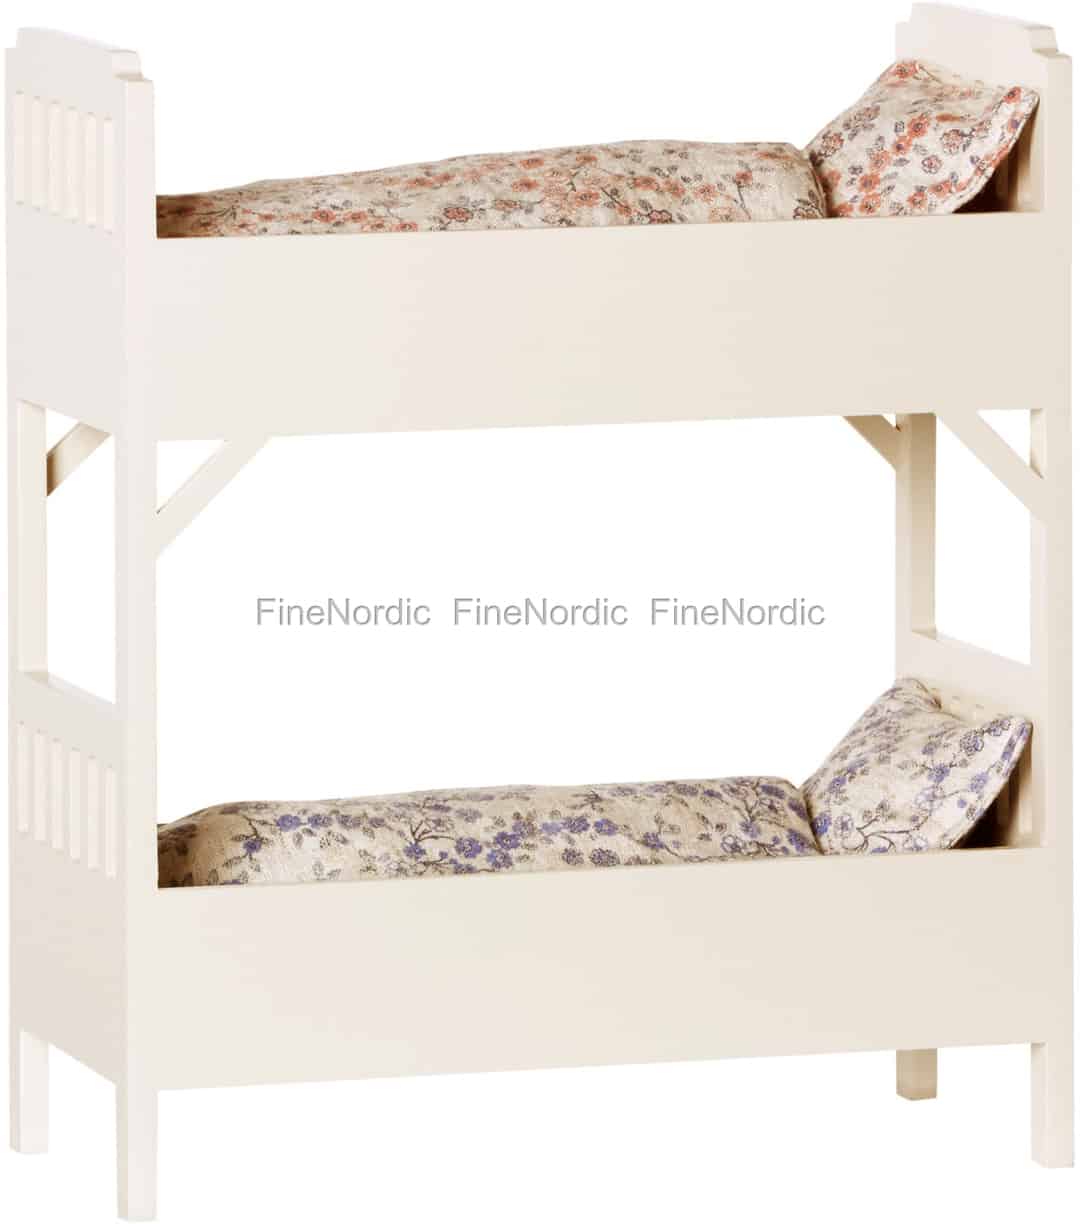 Maileg Rabbit Bunk Bed Small Off White, Antique White Bunk Beds